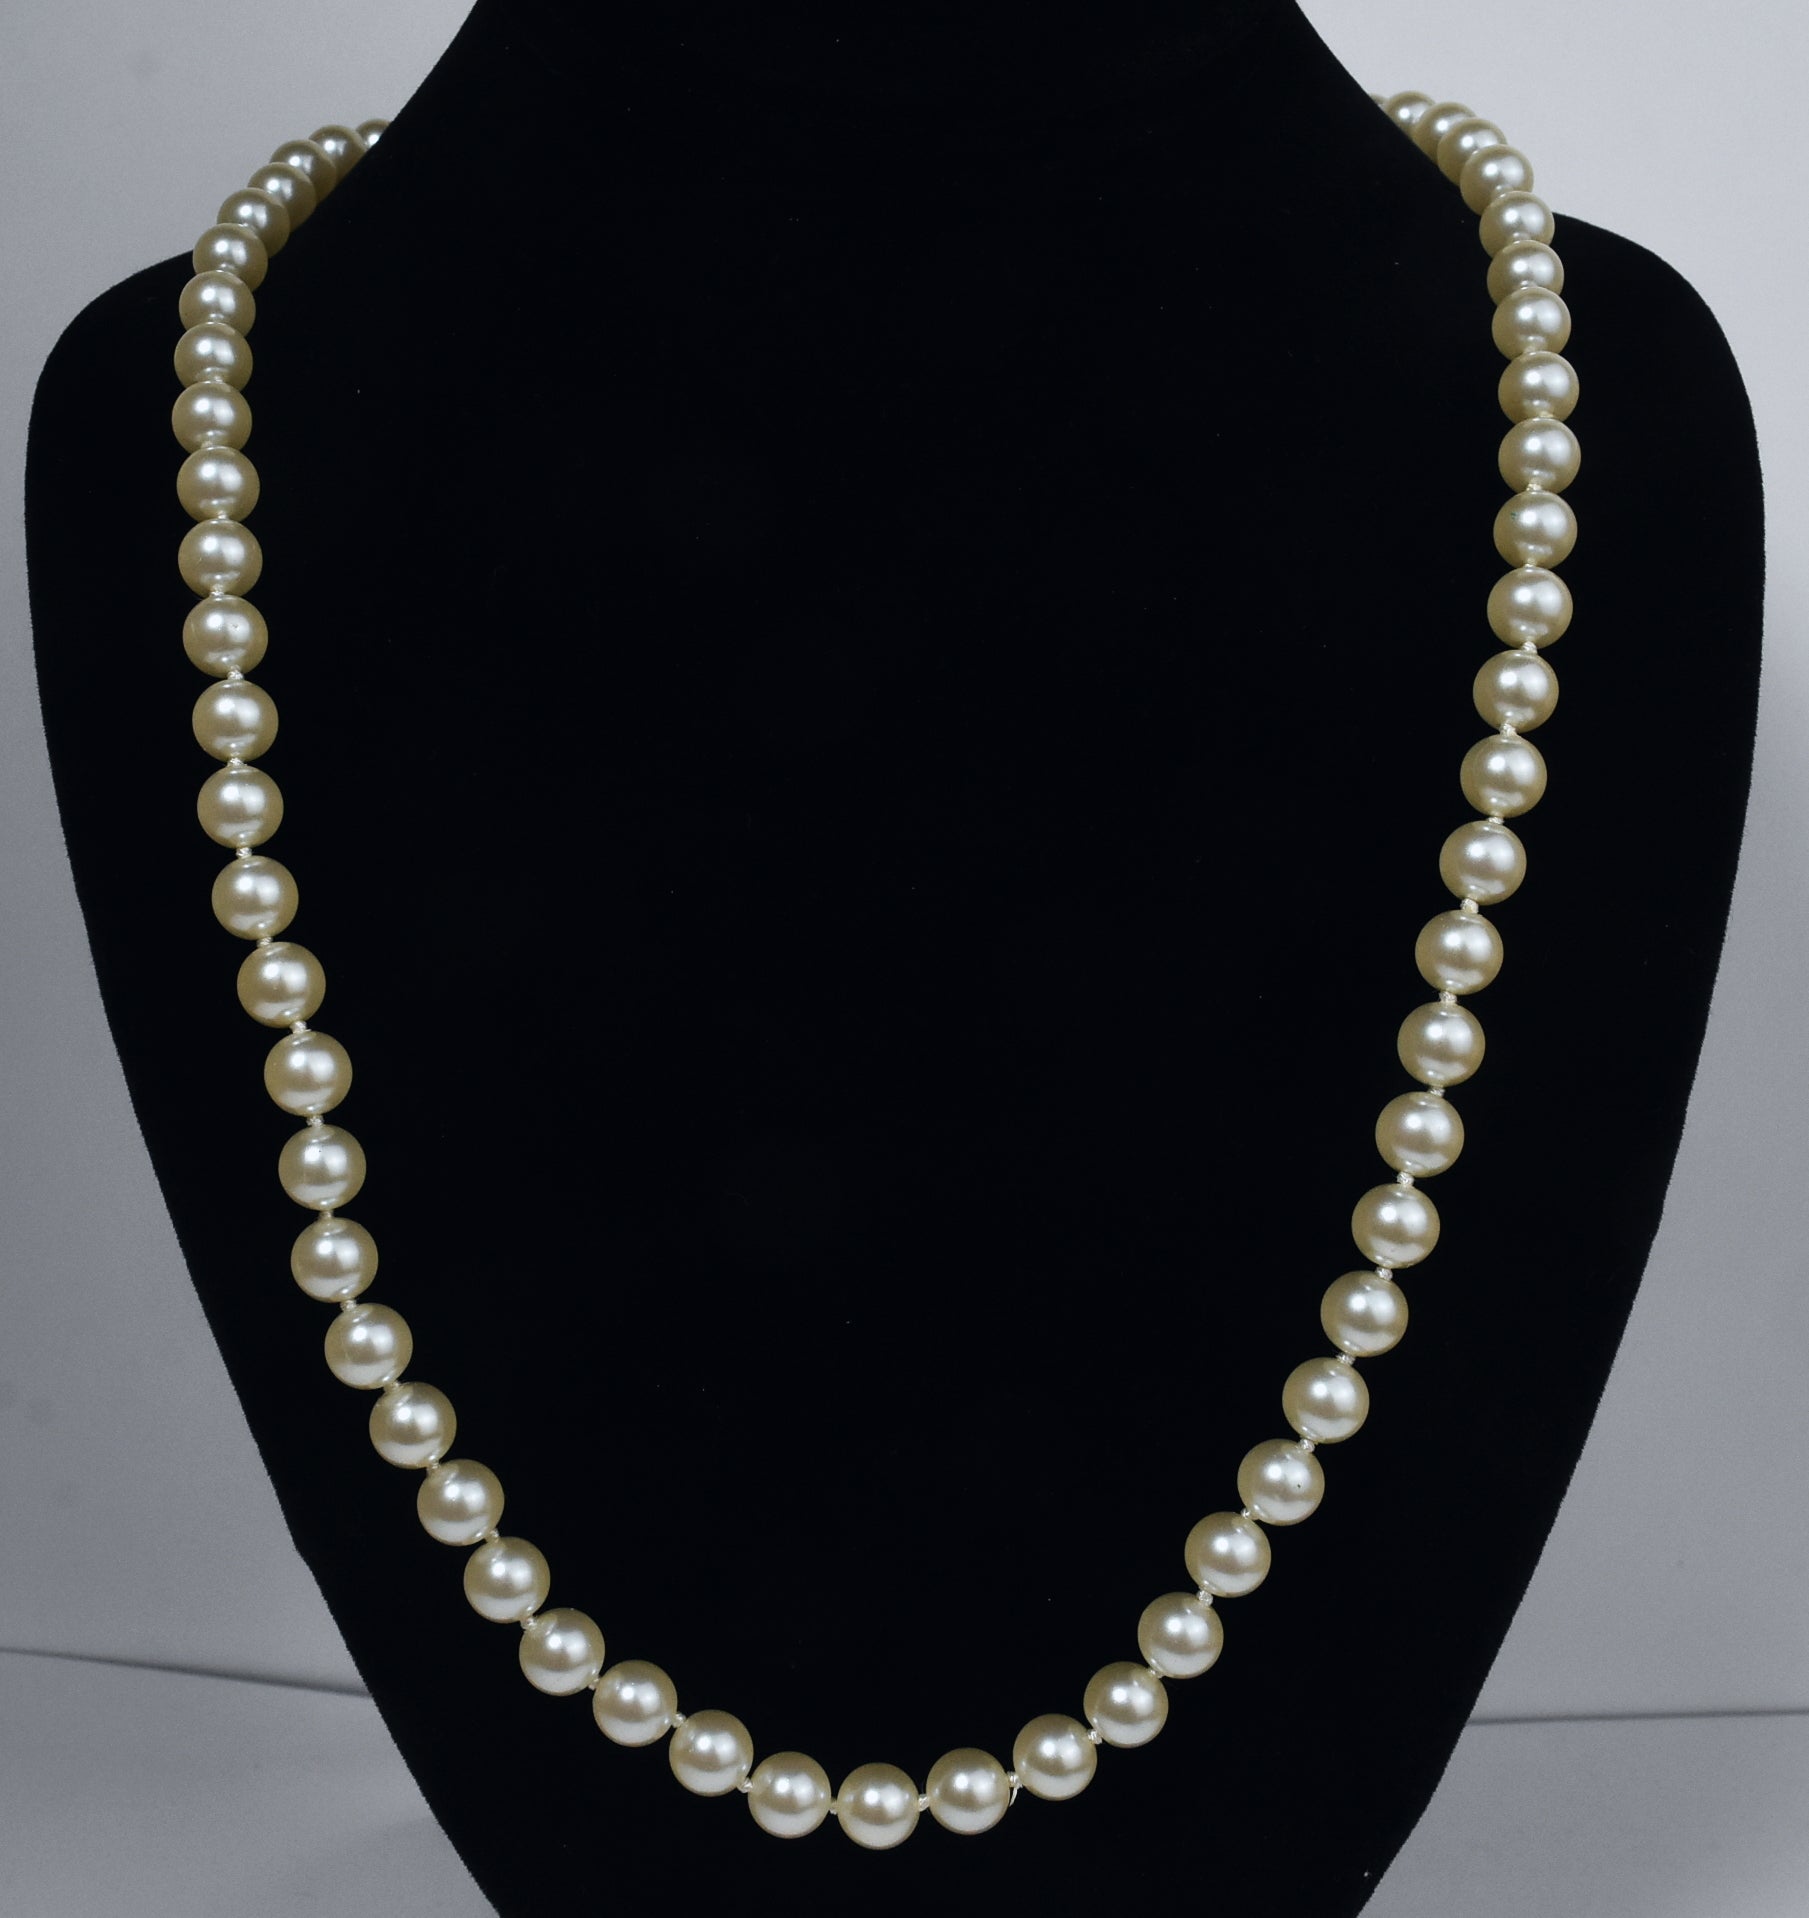 Single Strand Faux Pearl Necklace - 30"